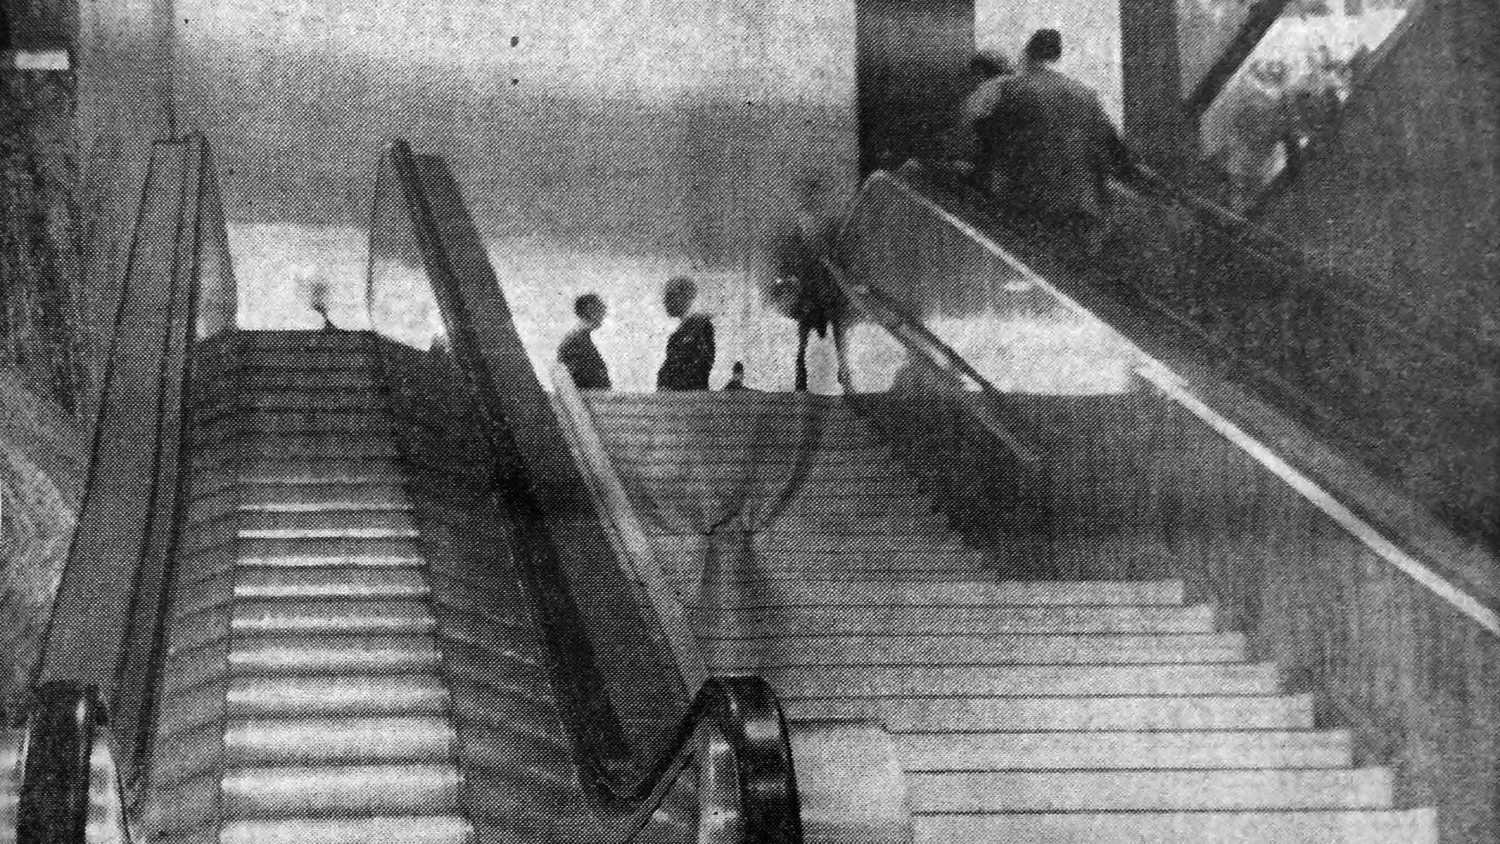 Gleaming escalators transport some passengers (original caption), for "The Performance of Shame: The Desegregation Renovations of Downtown Atlanta" by Peter Zuspan